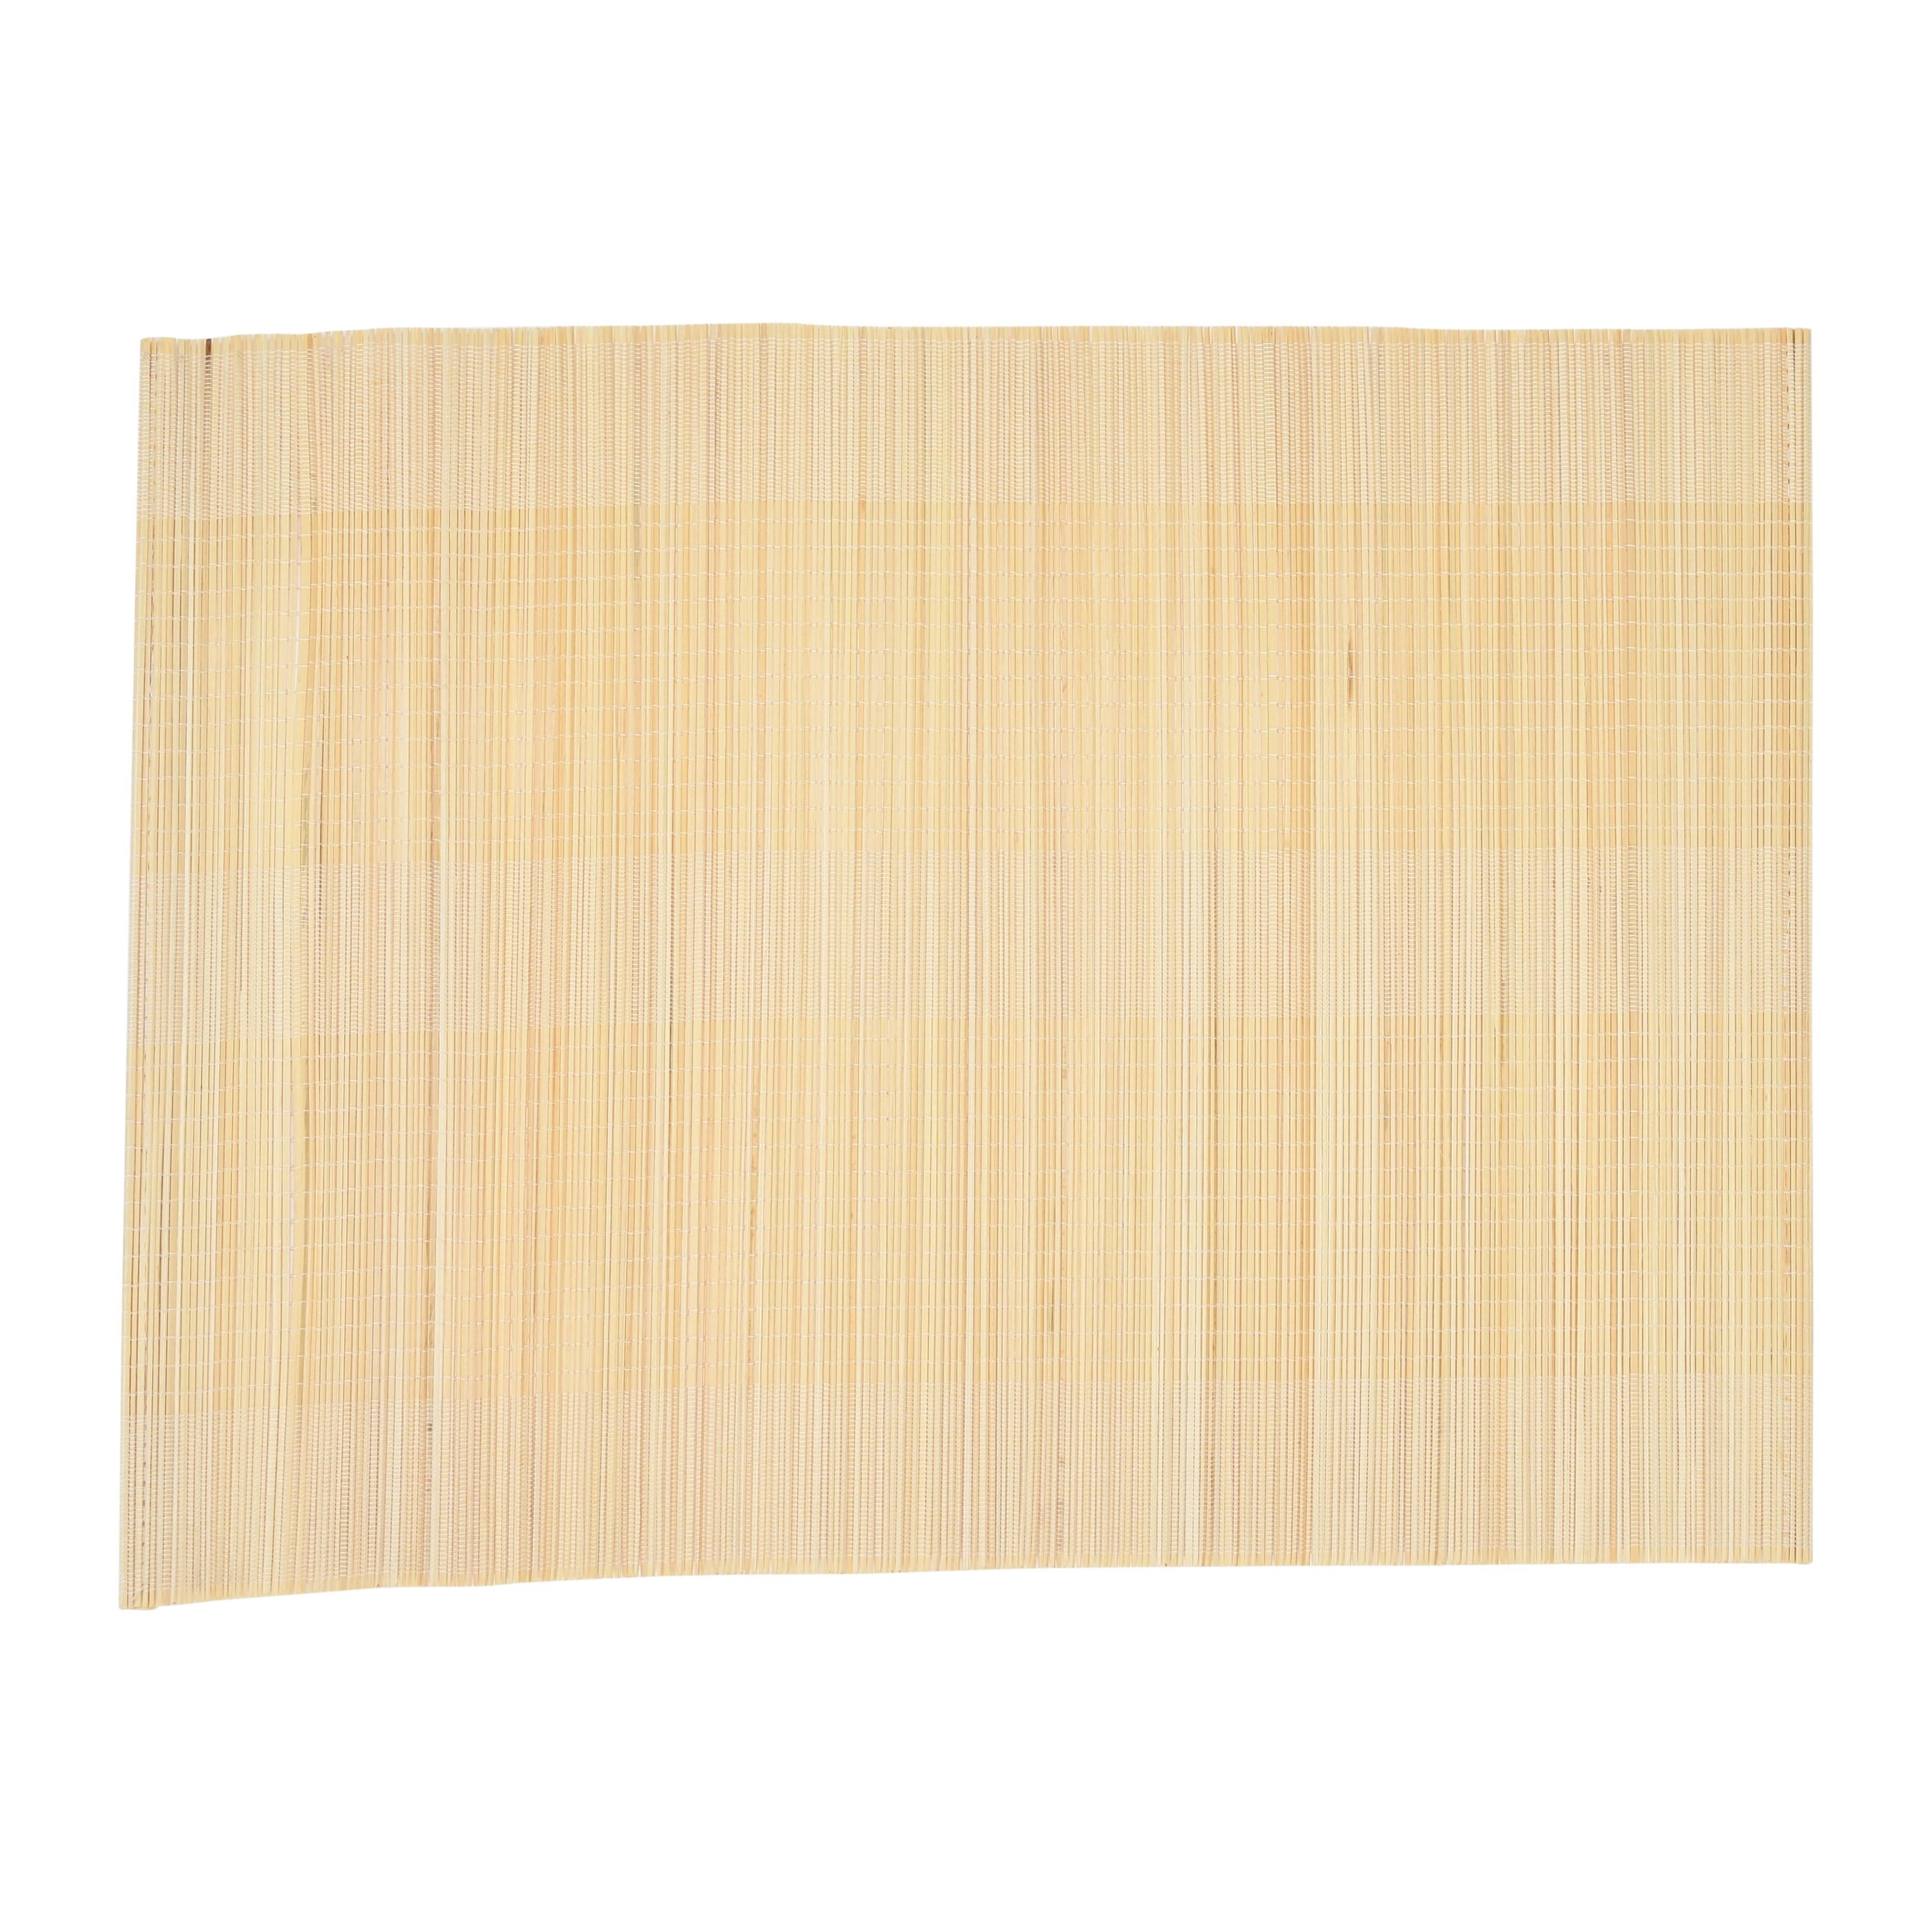 https://ak1.ostkcdn.com/images/products/is/images/direct/a3719330d3e5b7e45dc84764e244b140bc3ef357/Hand-Woven-Bamboo-Striped-Placemat%2C-Cream-Color-%26-Natural%2C-Set-of-12.jpg